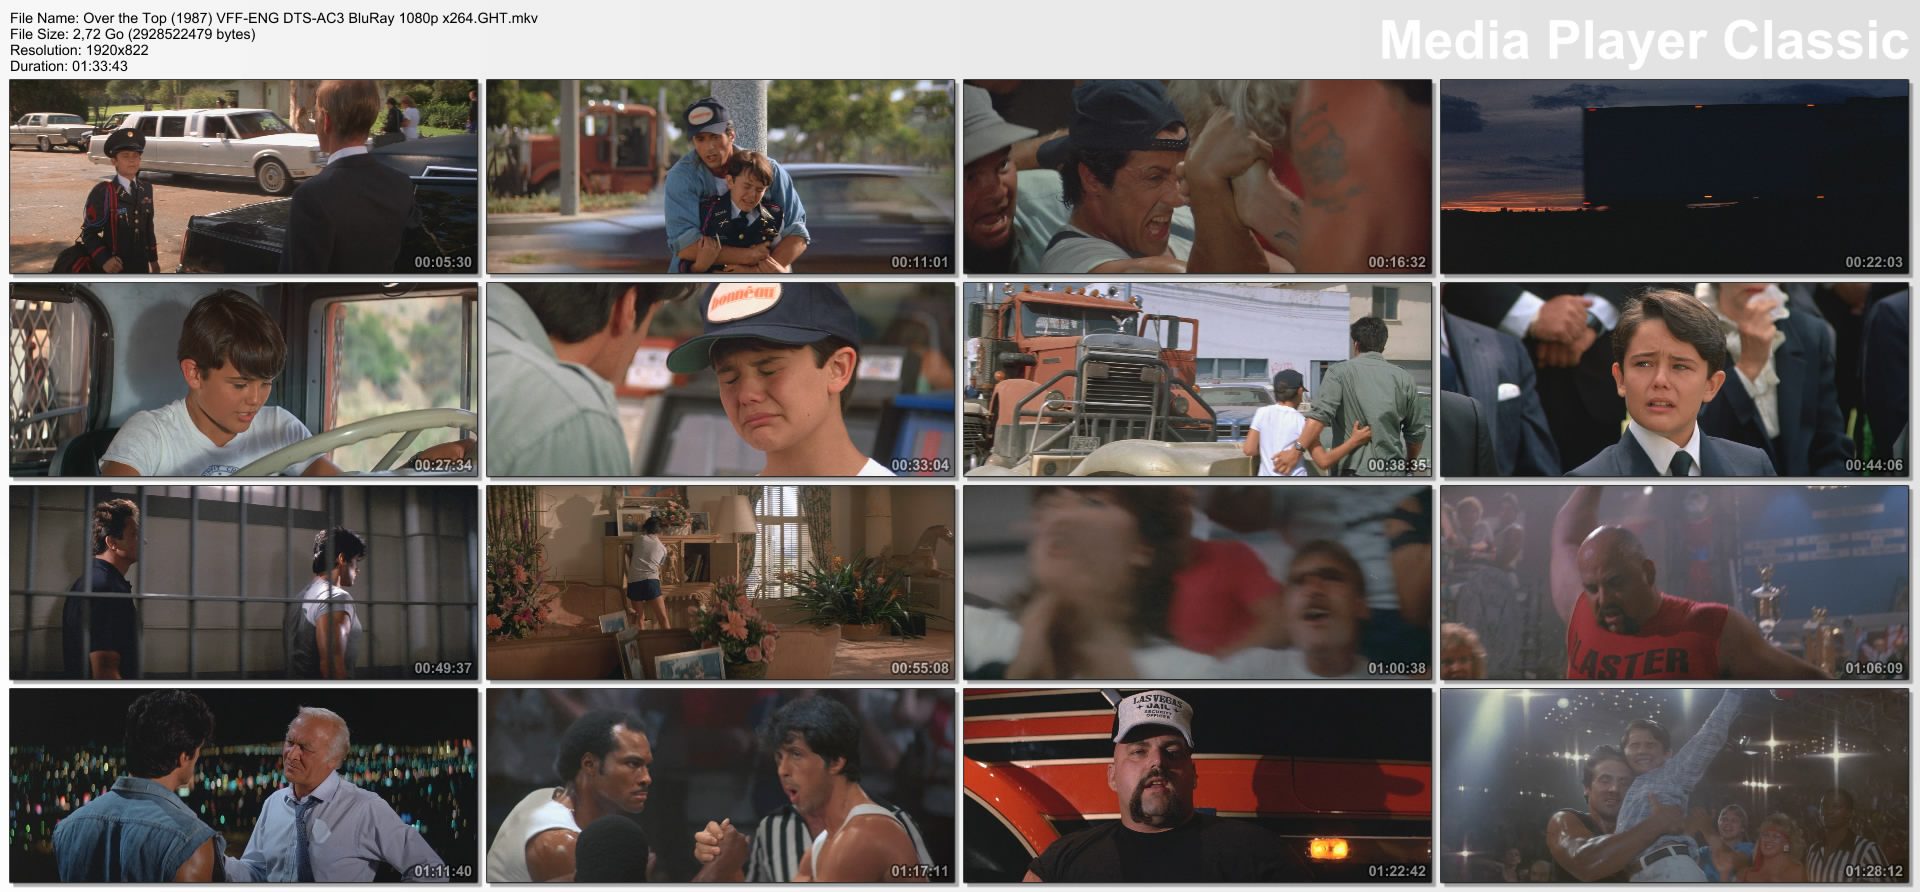 Over the Top (1987) VFF-ENG DTS-AC3 BluRay 1080p x264.GHT